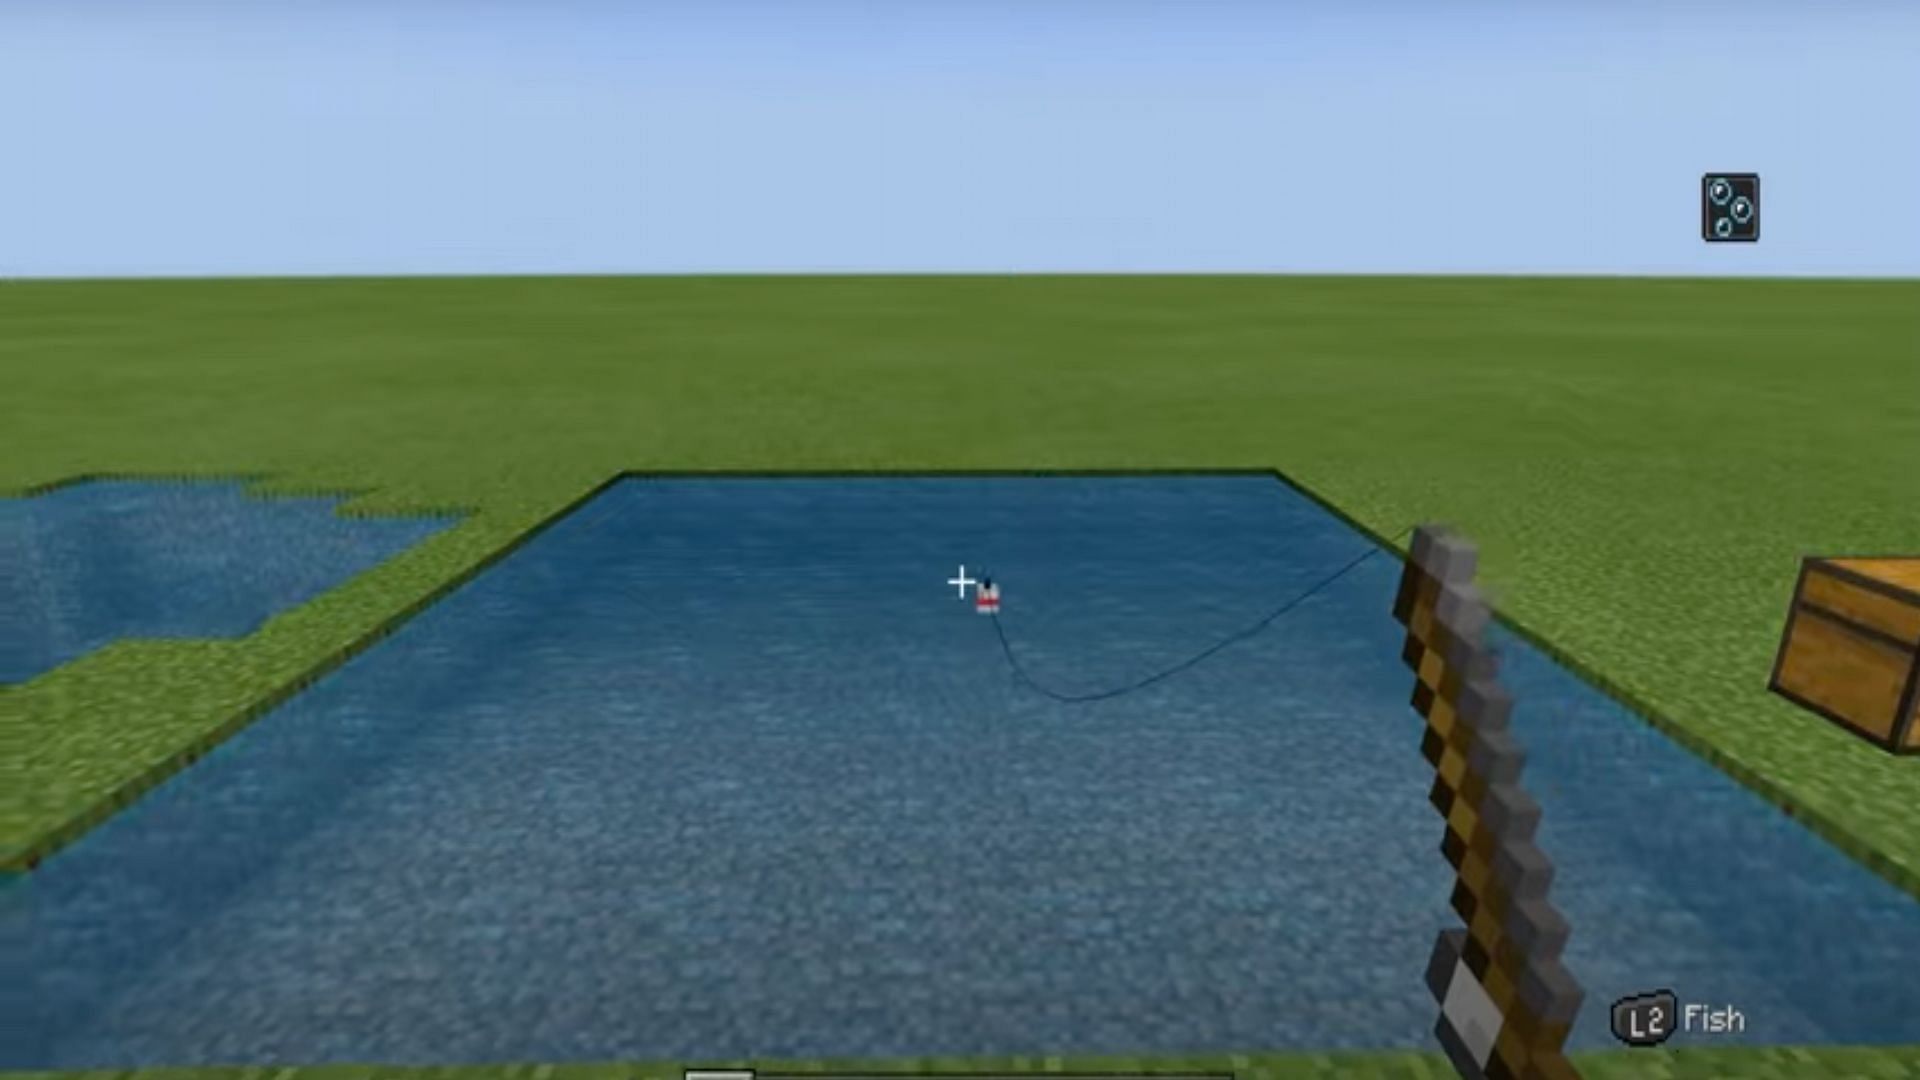 Players of Minecraft can easily gather a lot of fish by using proper methods (Image via BuJJaP/YouTube)